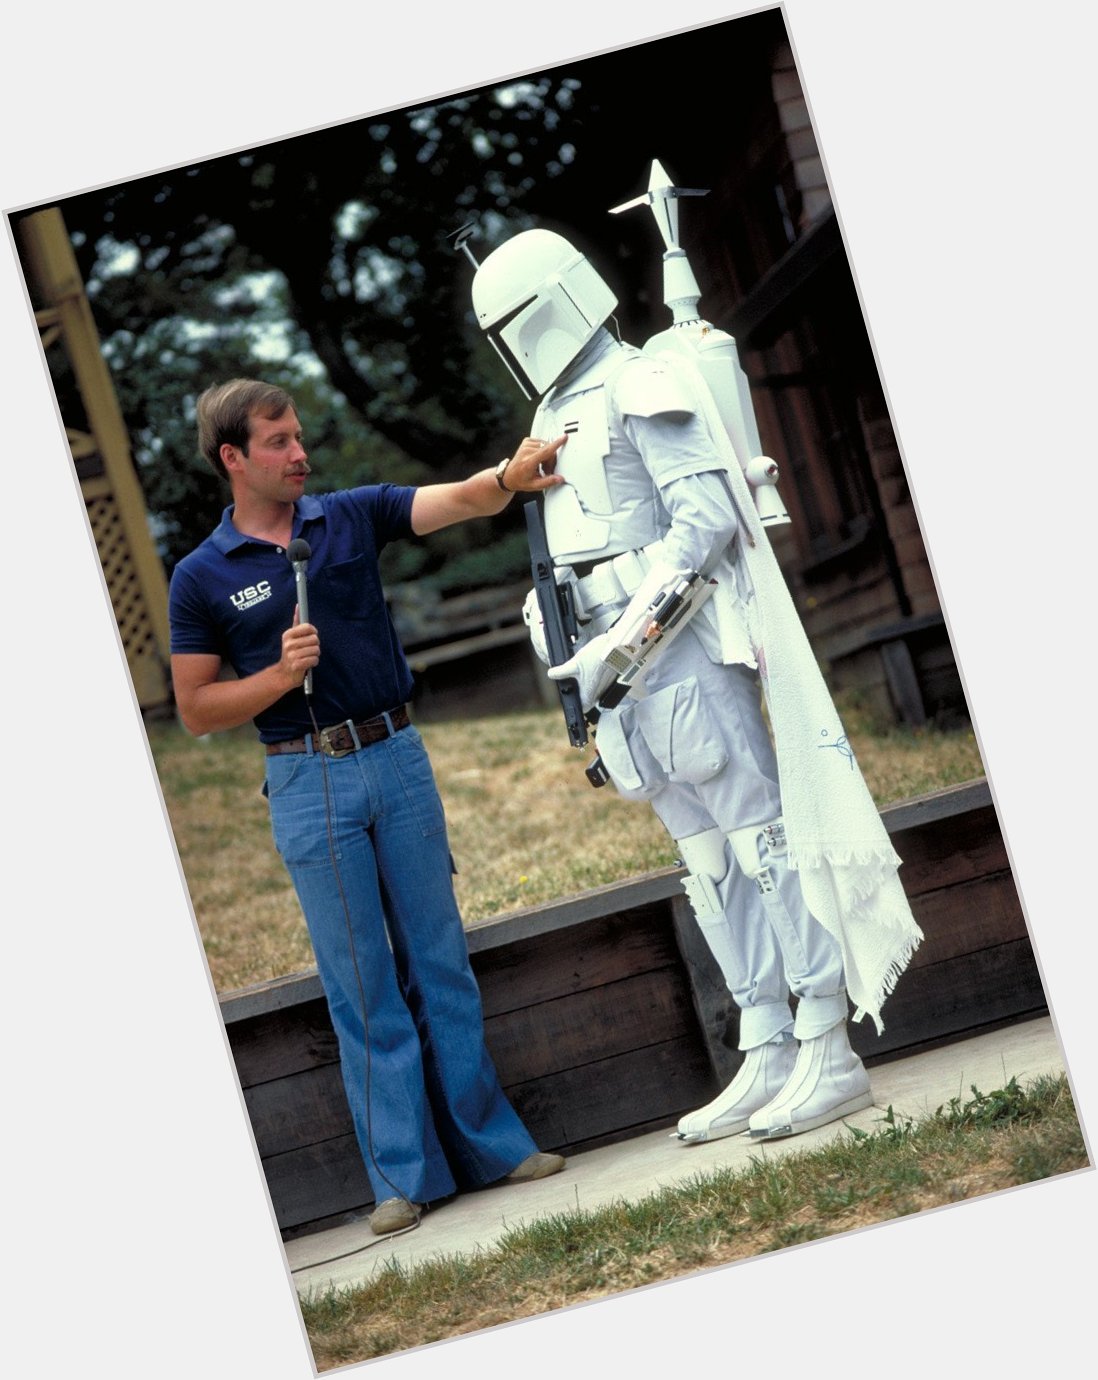 Happy birthday to Ben Burtt! He was the first person to give us a detailed look at Boba Fett\s armor. 